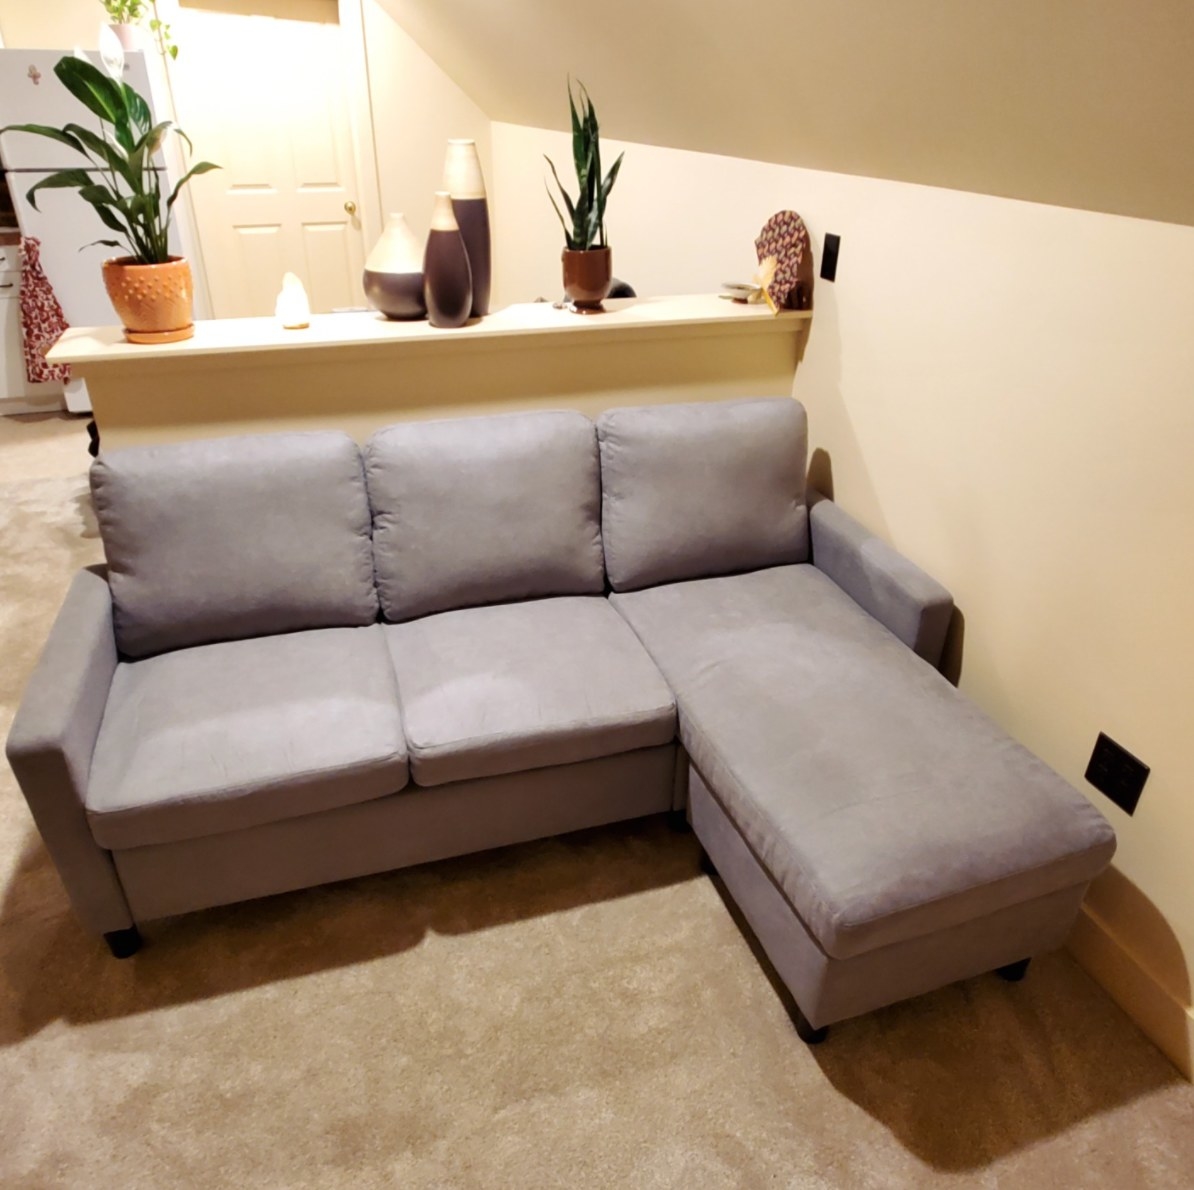 The L shaped sectional in gray